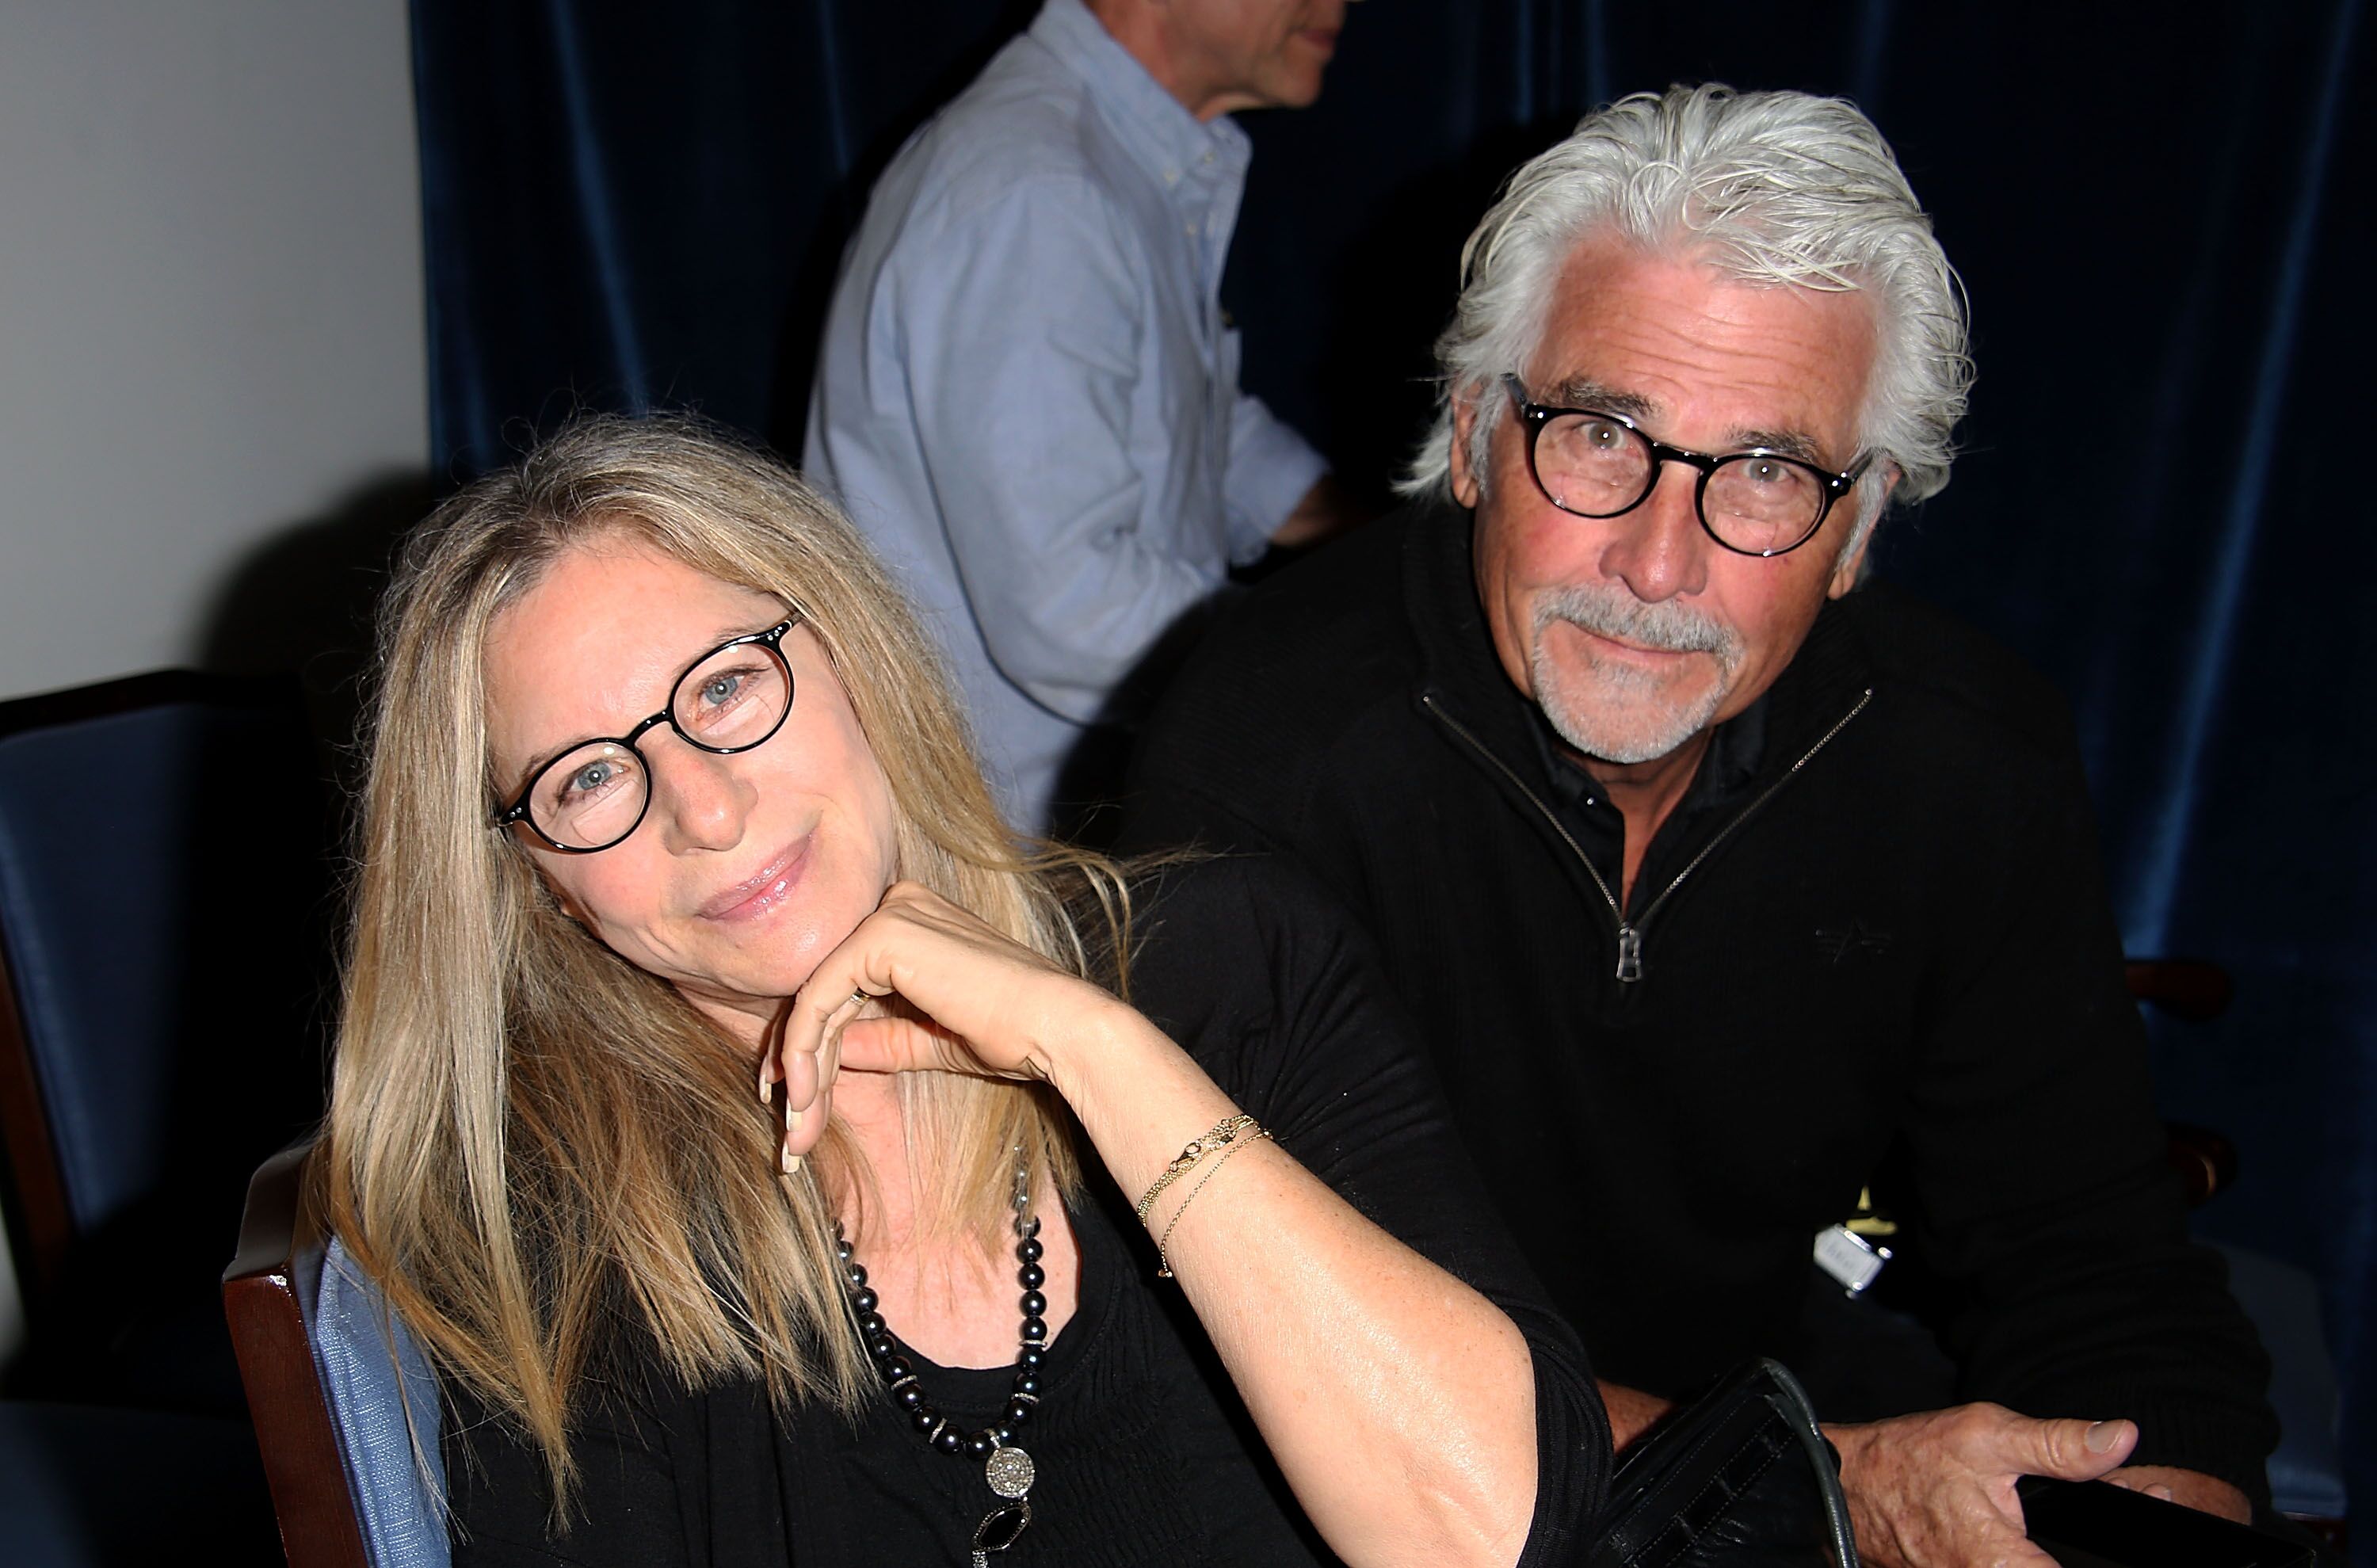 Barbra Streisand and James Brolin attend the "And So It Goes" premiere. | Source: Getty Images